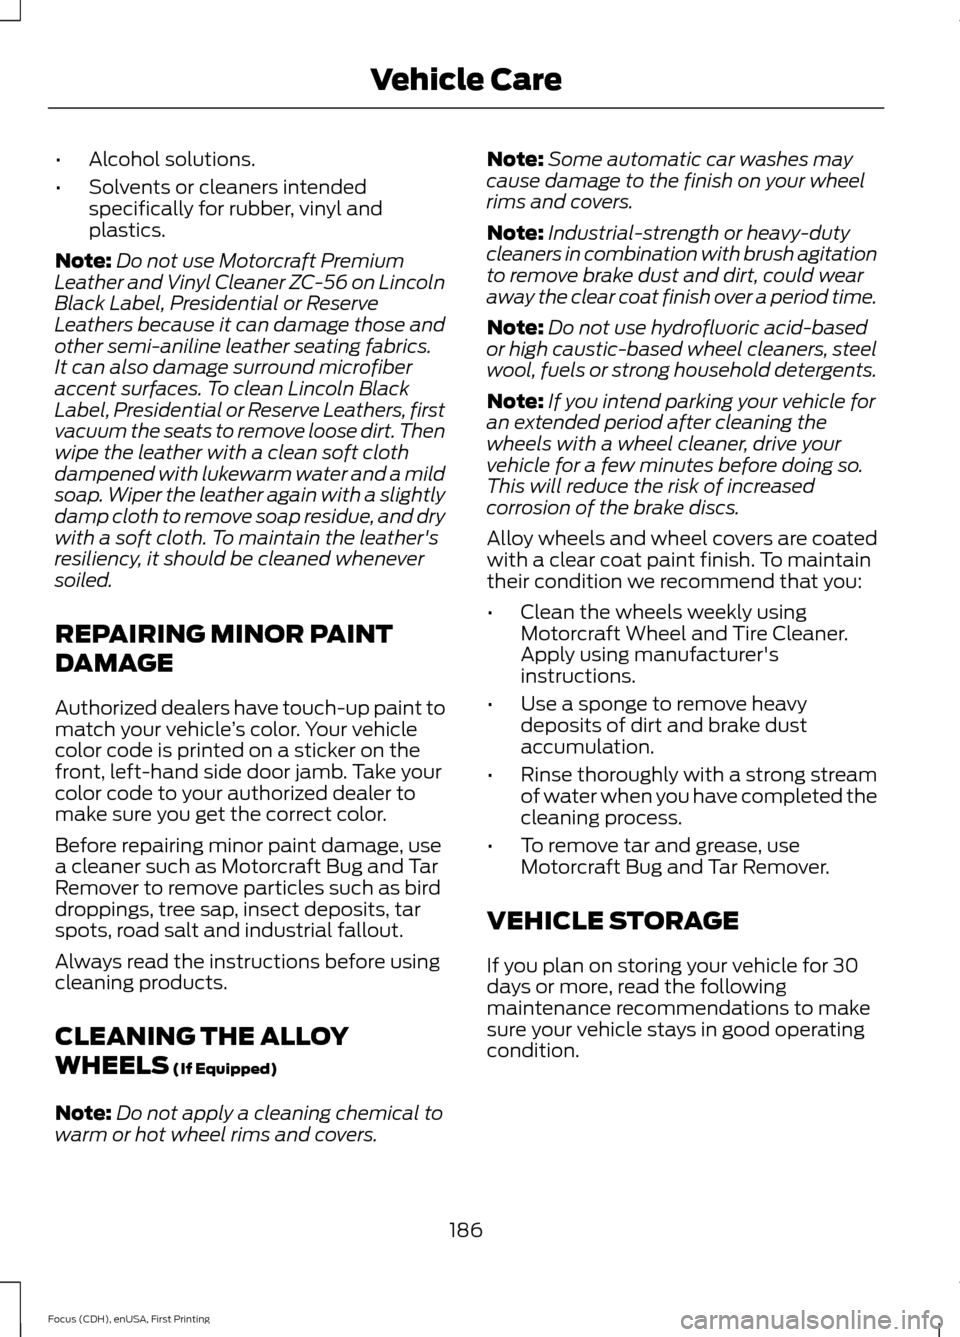 FORD FOCUS ELECTRIC 2015 3.G Owners Manual •
Alcohol solutions.
• Solvents or cleaners intended
specifically for rubber, vinyl and
plastics.
Note: Do not use Motorcraft Premium
Leather and Vinyl Cleaner ZC-56 on Lincoln
Black Label, Presid